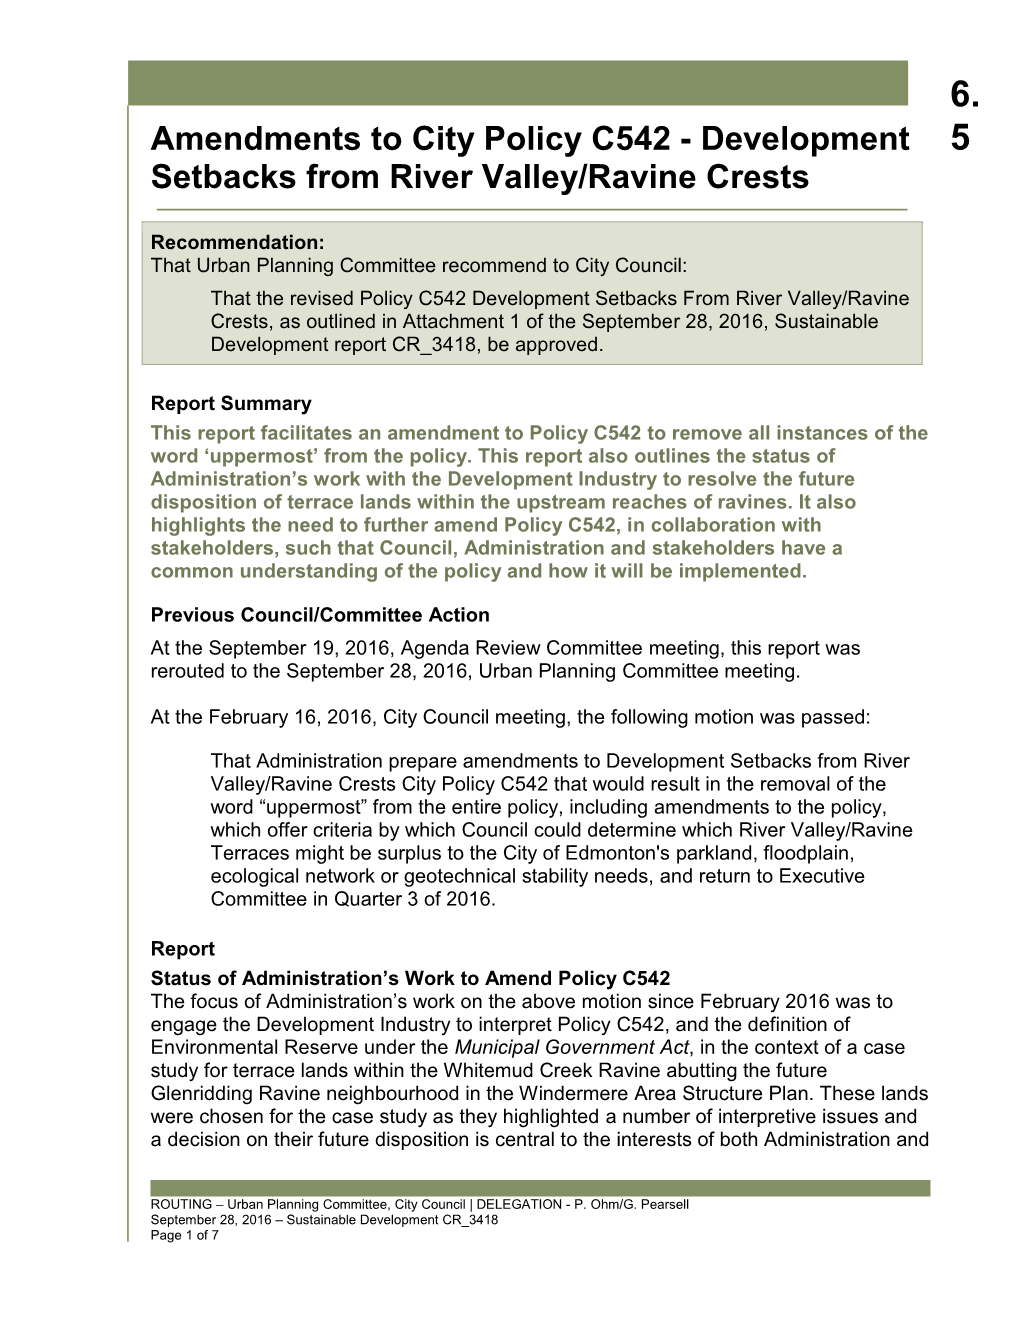 Development Setbacks from River Valley/Ravine Crests, As Outlined in Attachment 1 of the September 28, 2016, Sustainable Development Report CR 3418, Be Approved